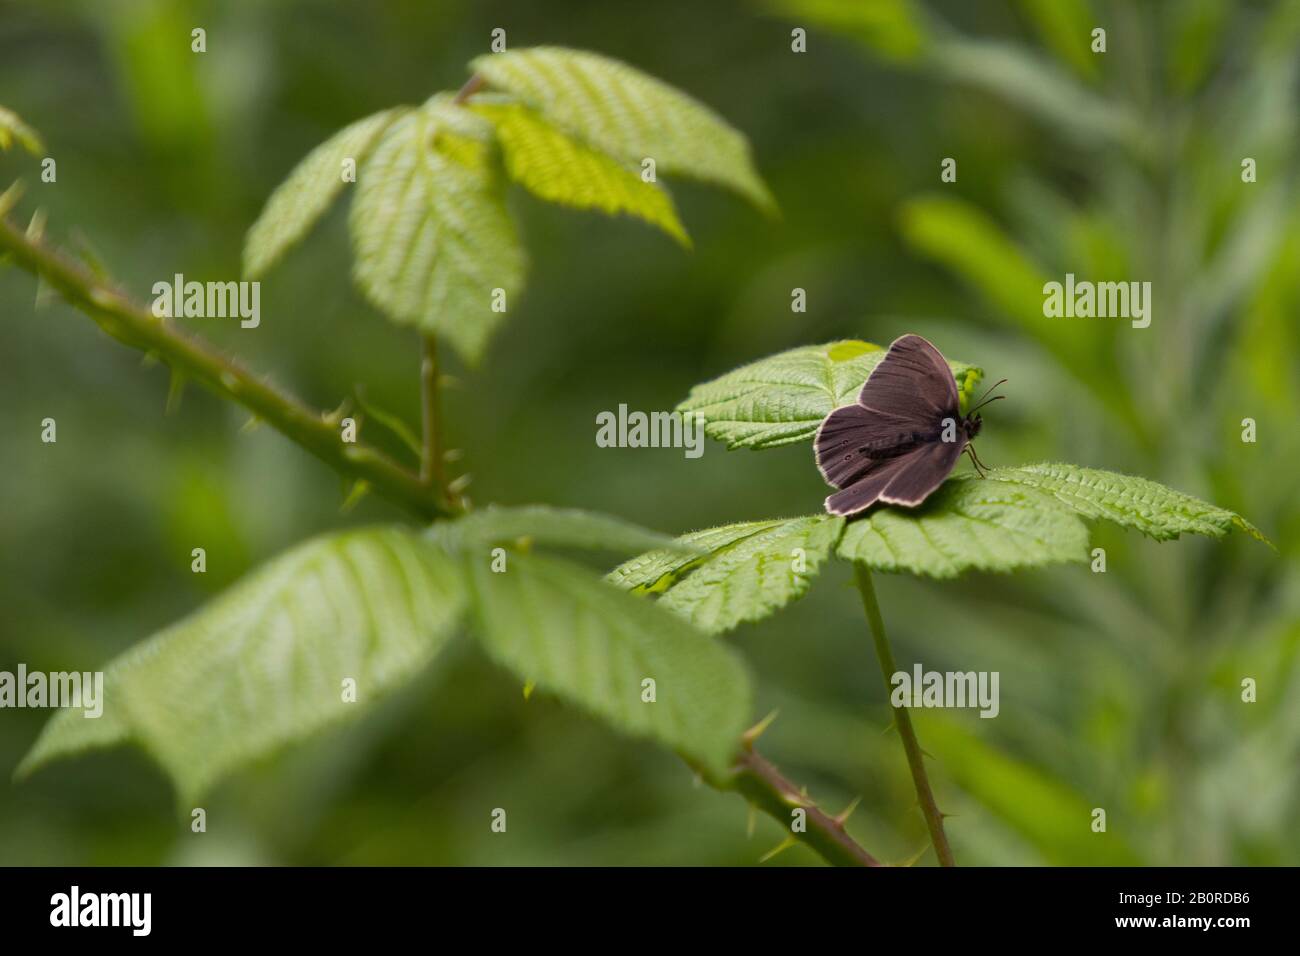 A delicate ringlet butterfly perched on a bramble leaf with foliage in the background Stock Photo